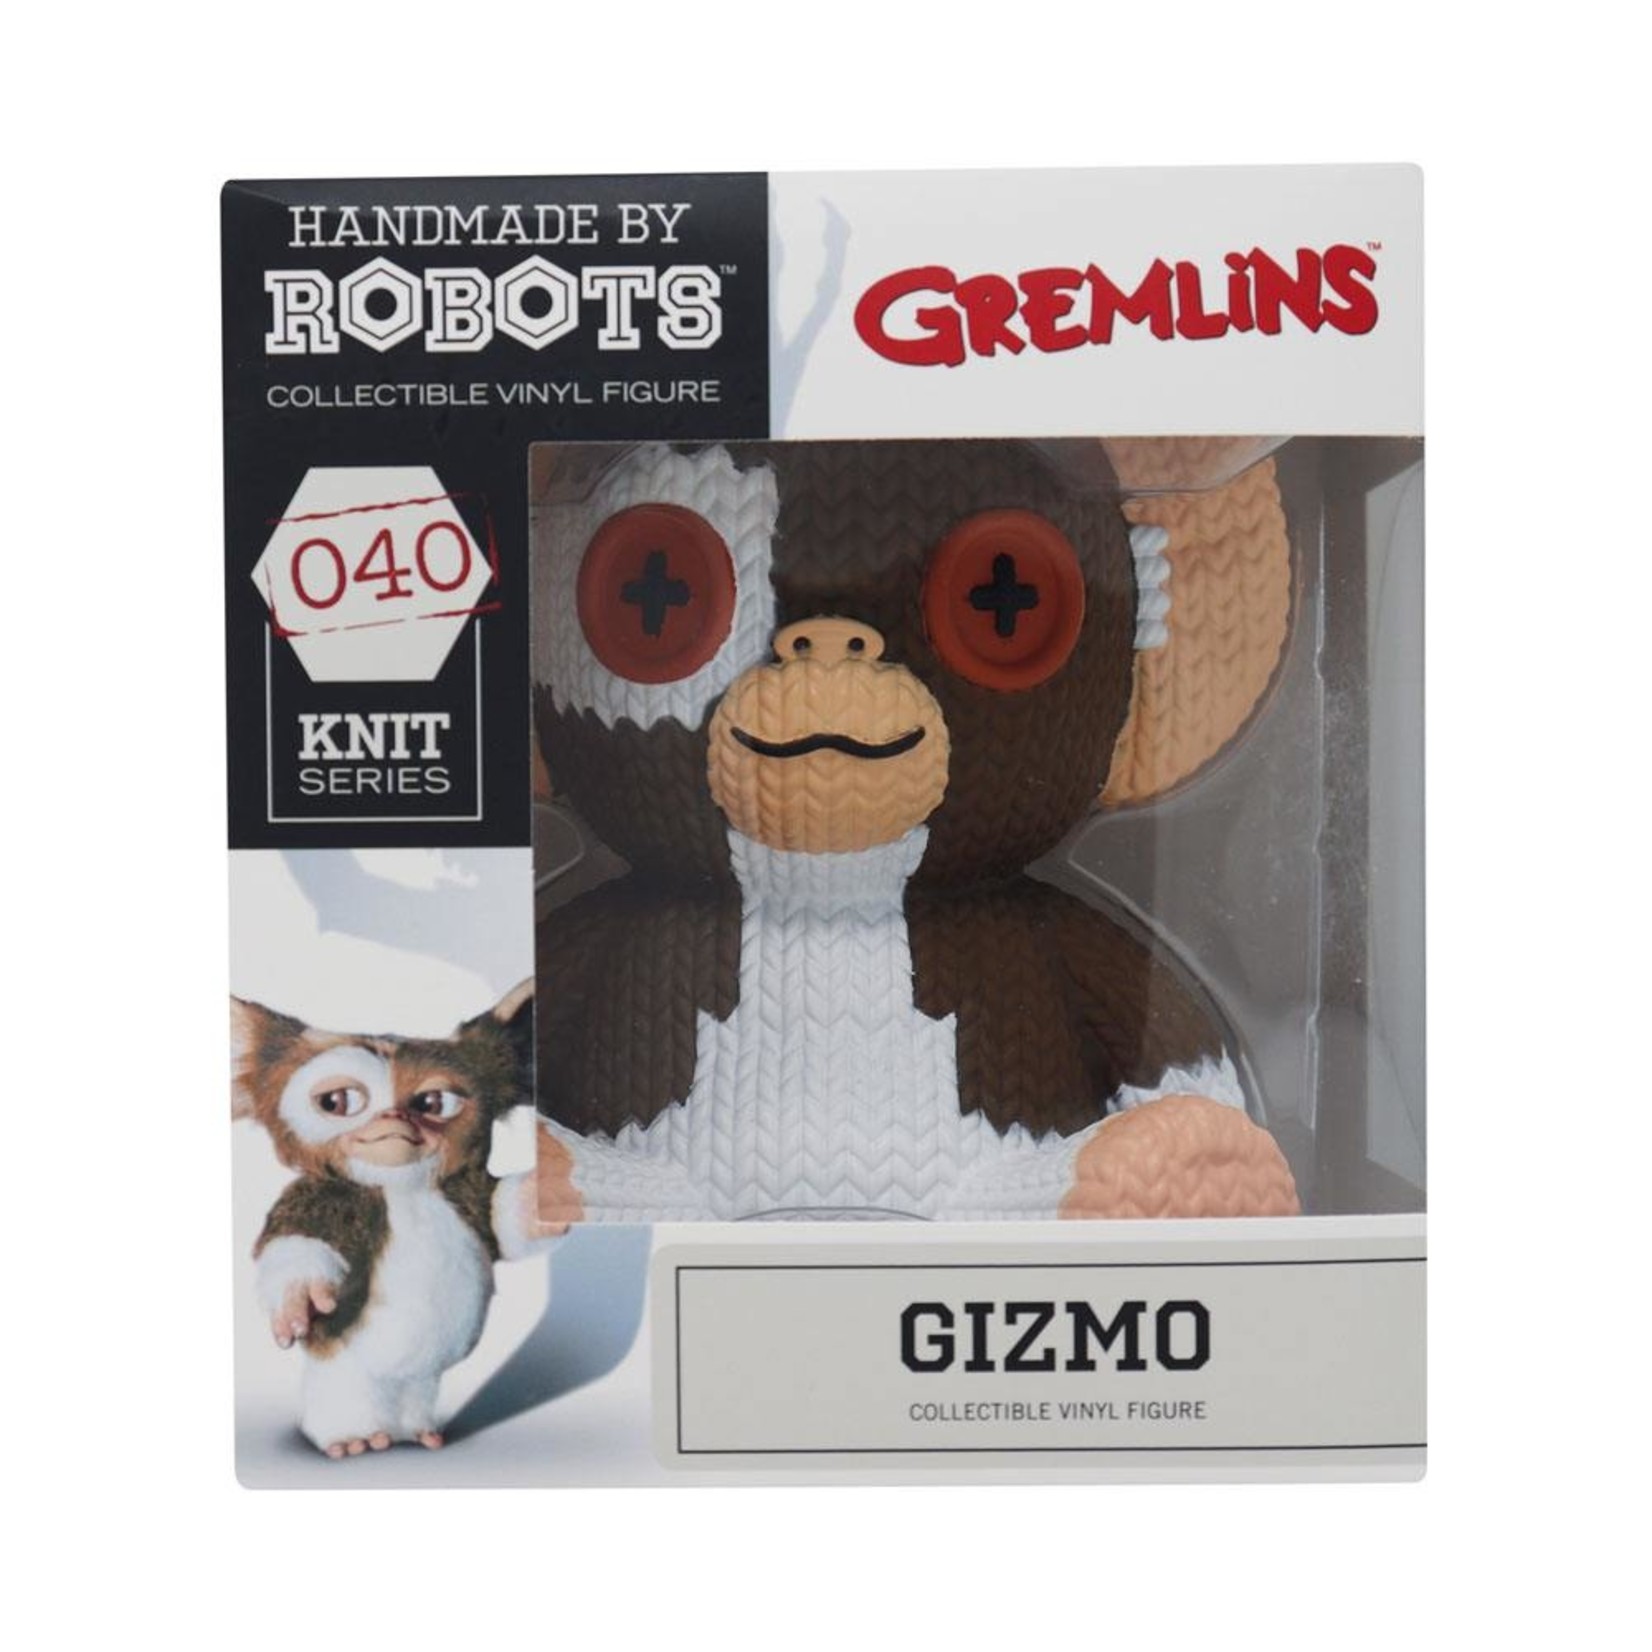 Handmade by Robots Handmade by Robots Gremlins Gizmo Collectible Vinyl Figure